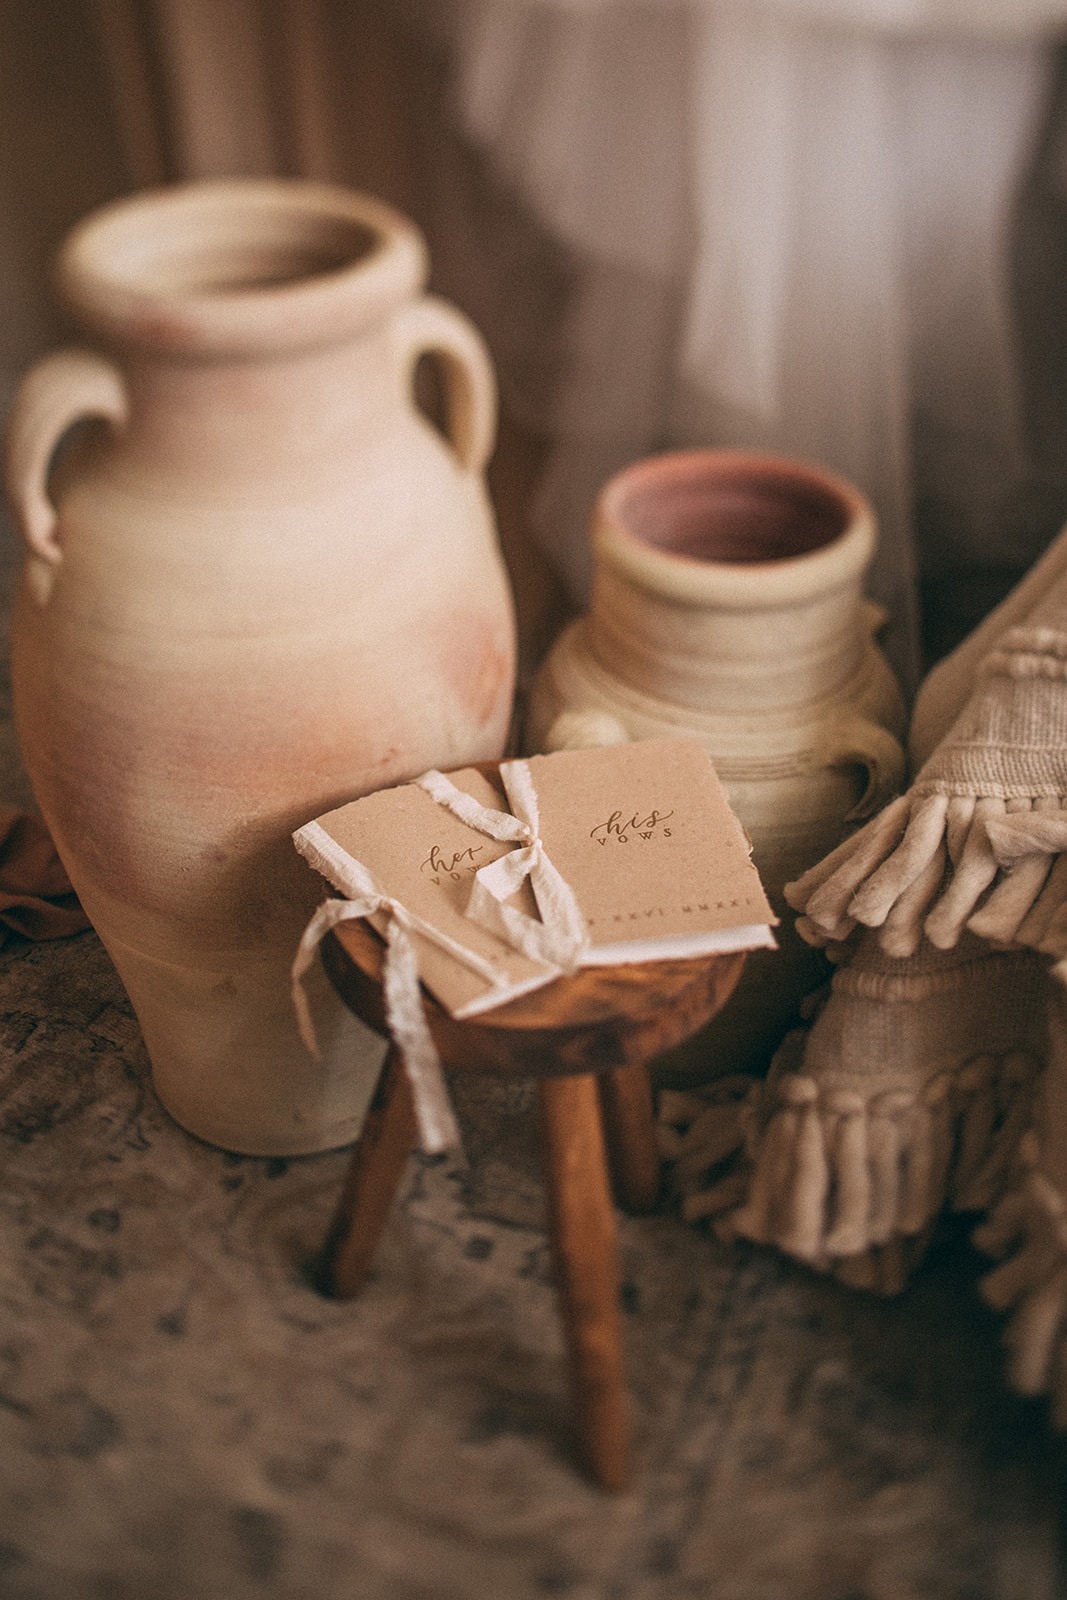 Boho wedding details with clay pots and neutral hue vow booklets